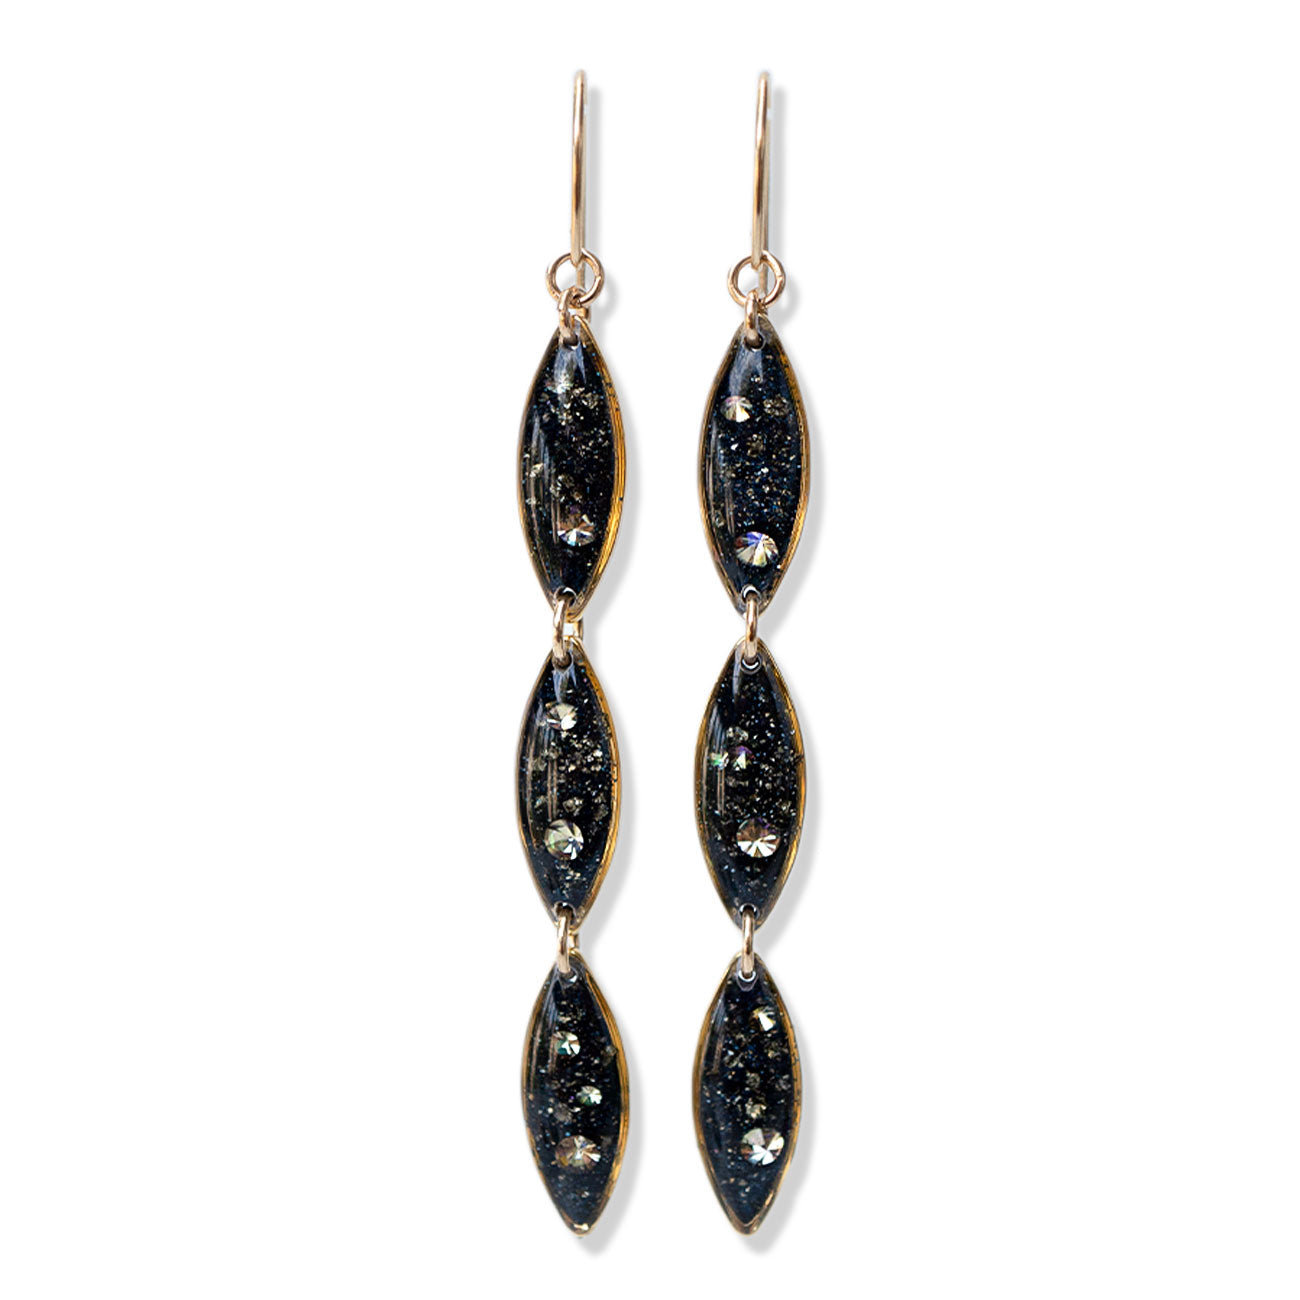 Oval Dangling Galaxy Earrings with crushed stones and Swarovski crystals, long dangling statement earrings.